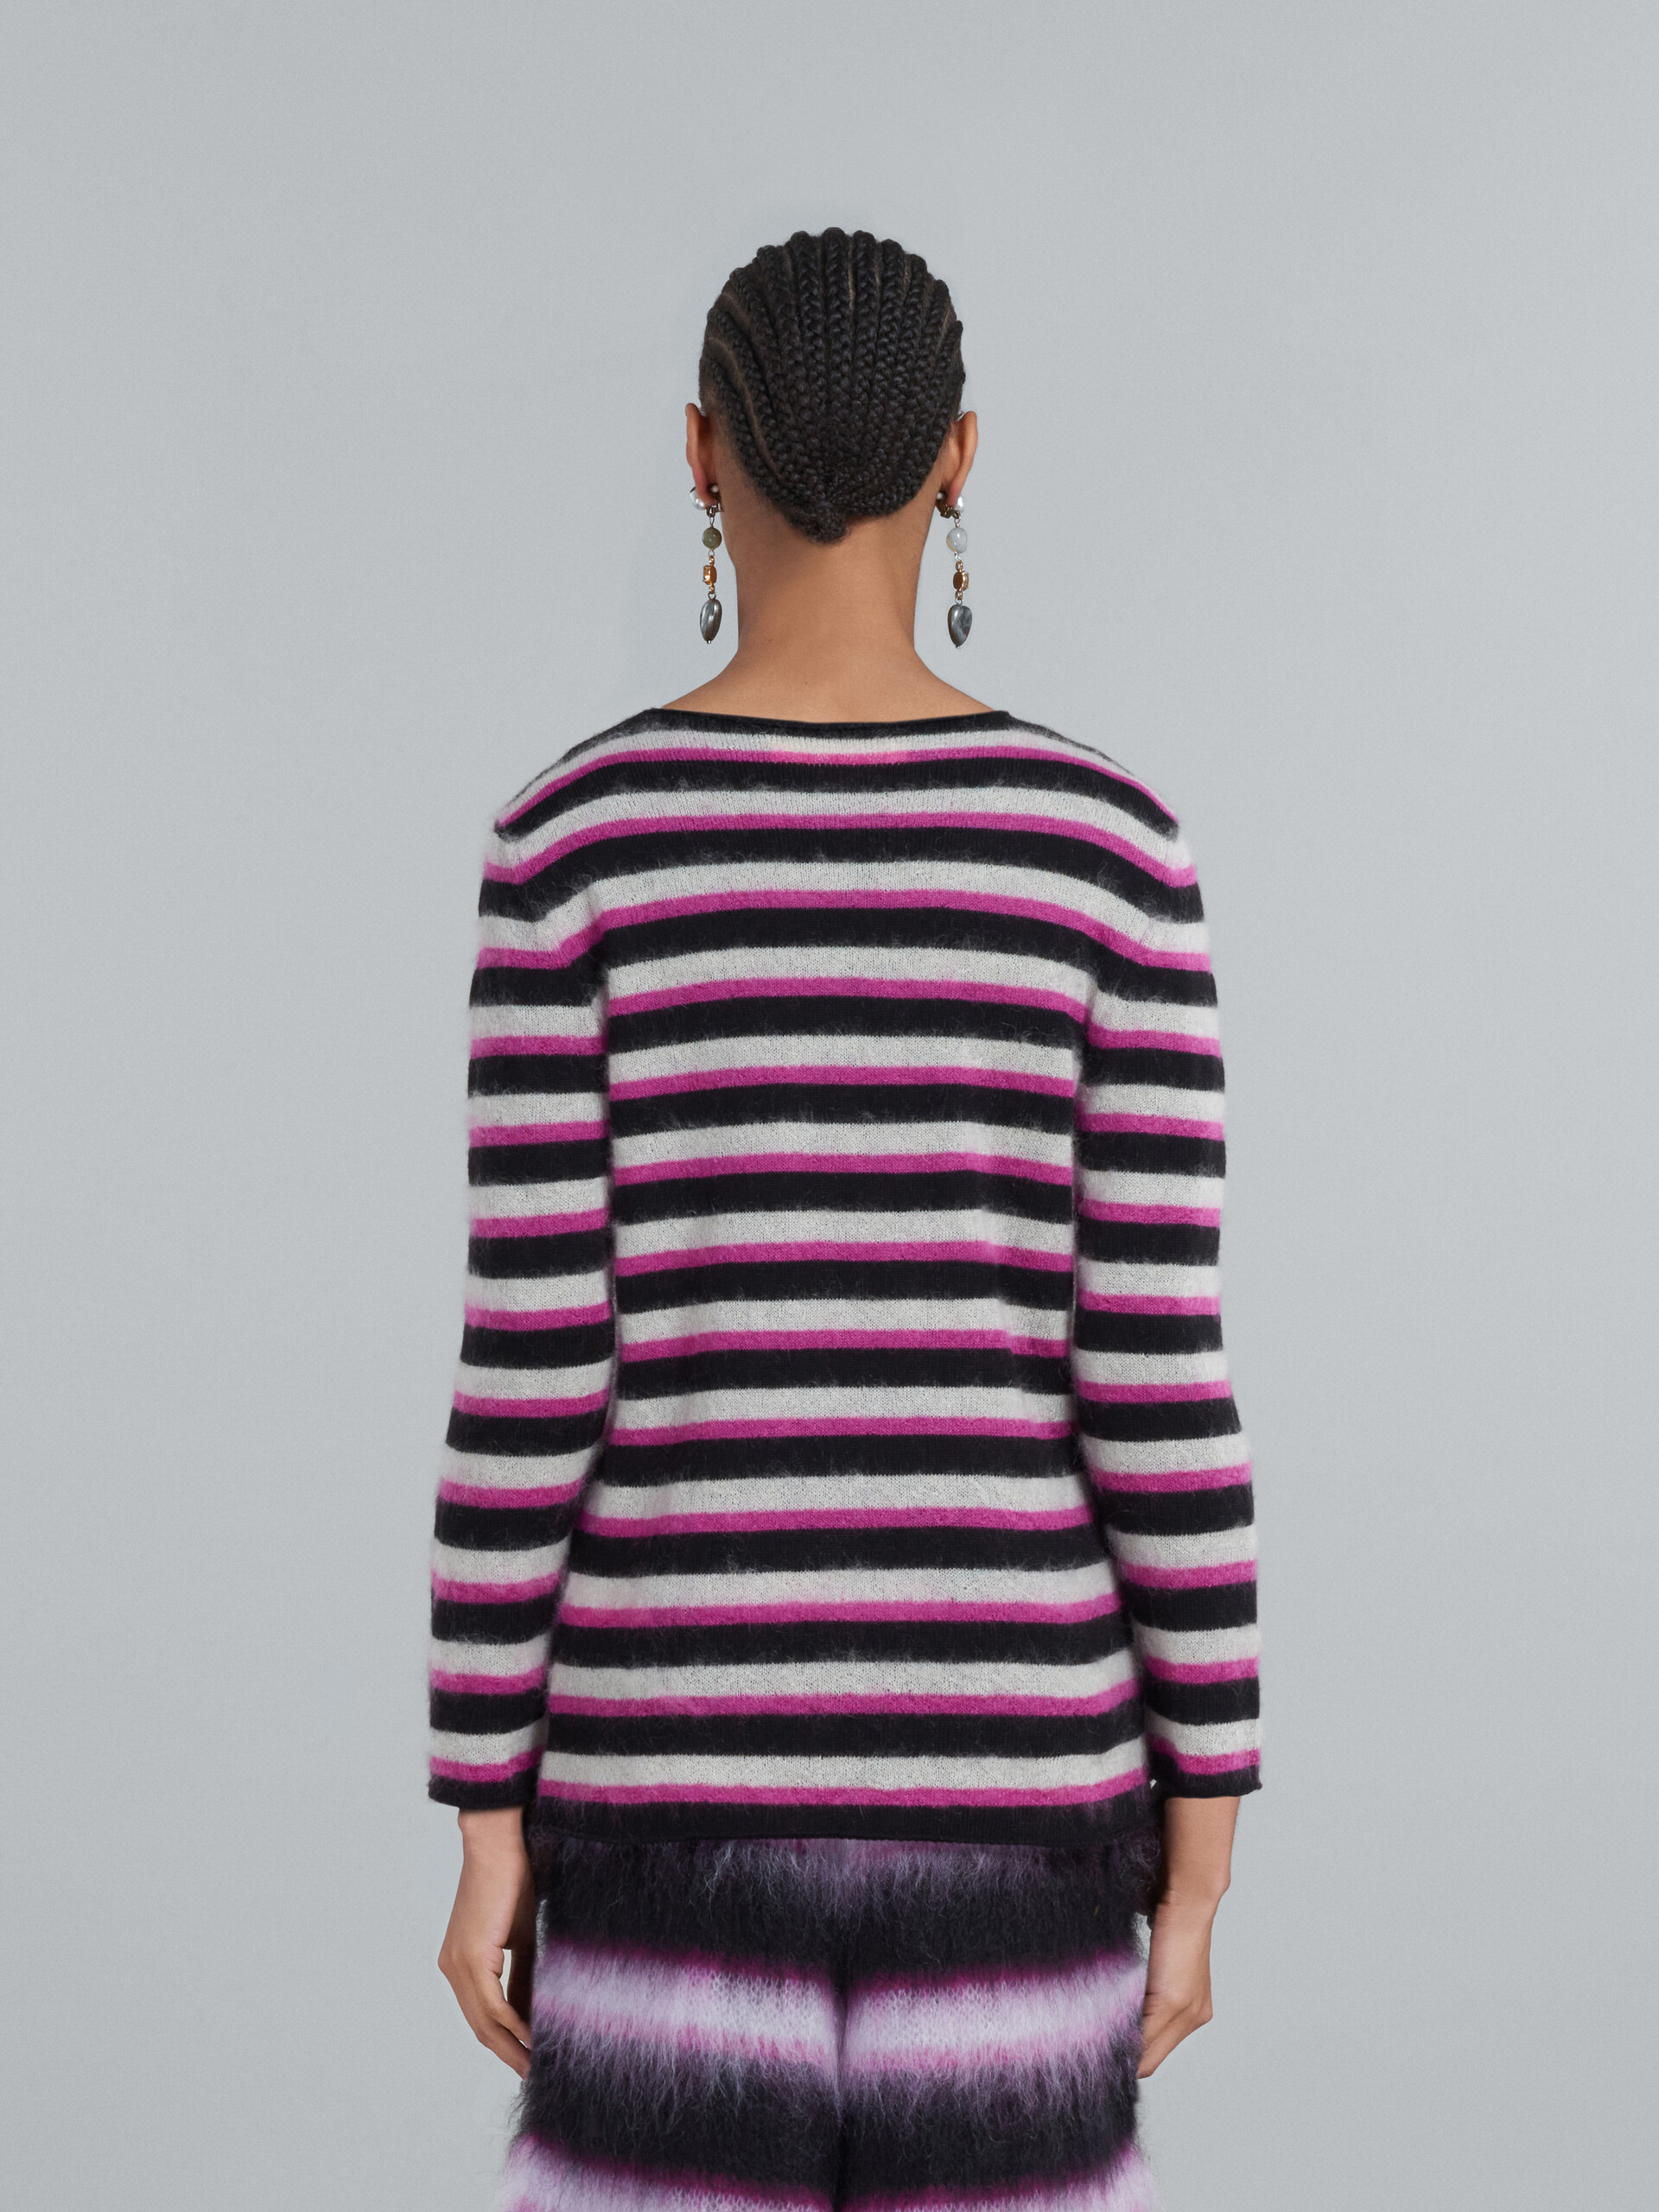 Mohair and light wool crewneck sweater - Pullovers - Image 3